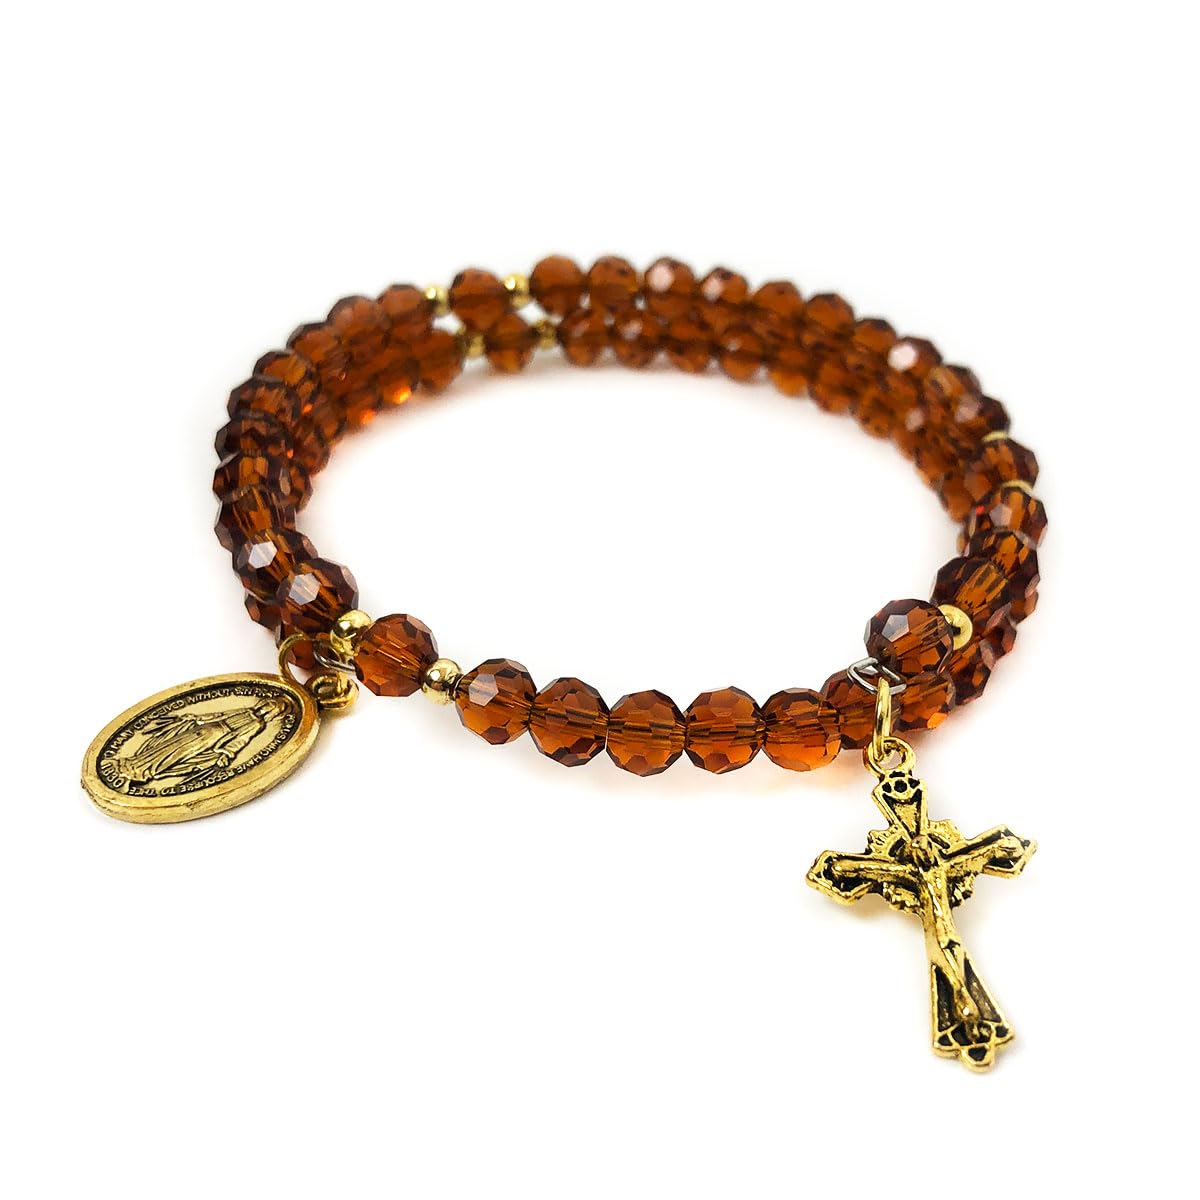 Miraculous Medal 2 Layer Brown Glass Bead Necklace and Virgin Mary Rosary Bracelet Set by DALIA LORRAINE